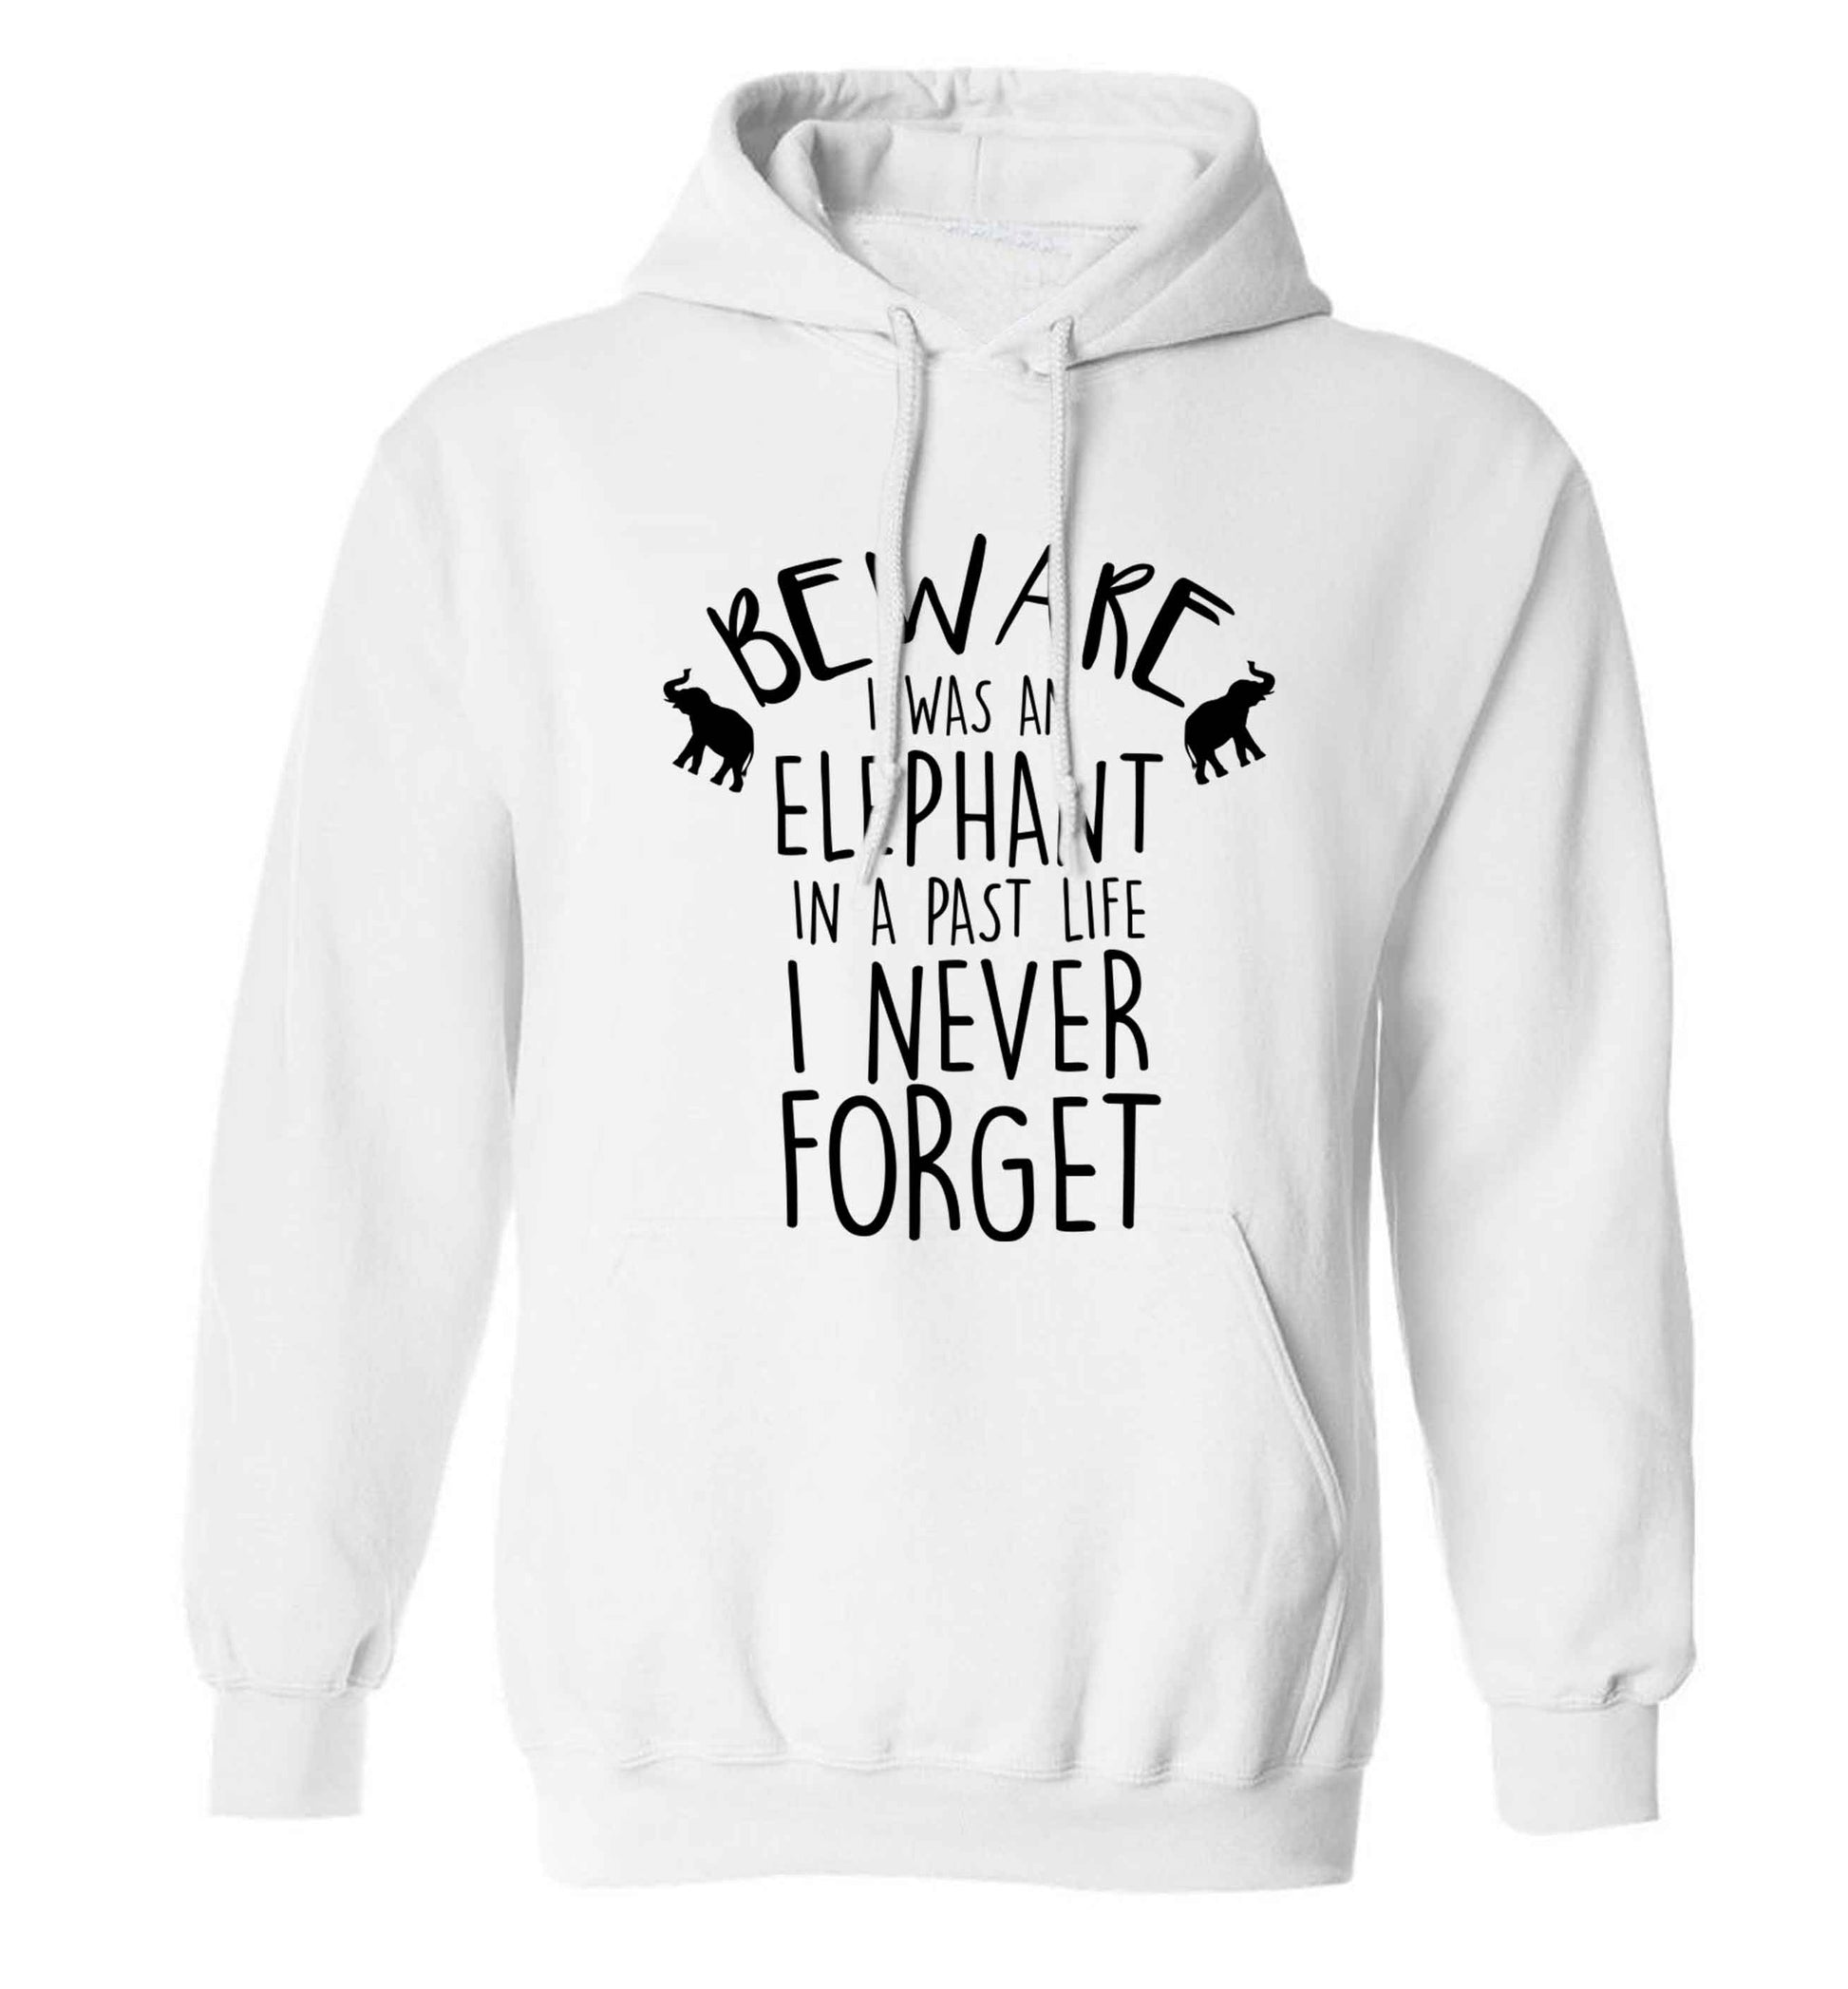 Beware I was an elephant in my past life I never forget adults unisex white hoodie 2XL